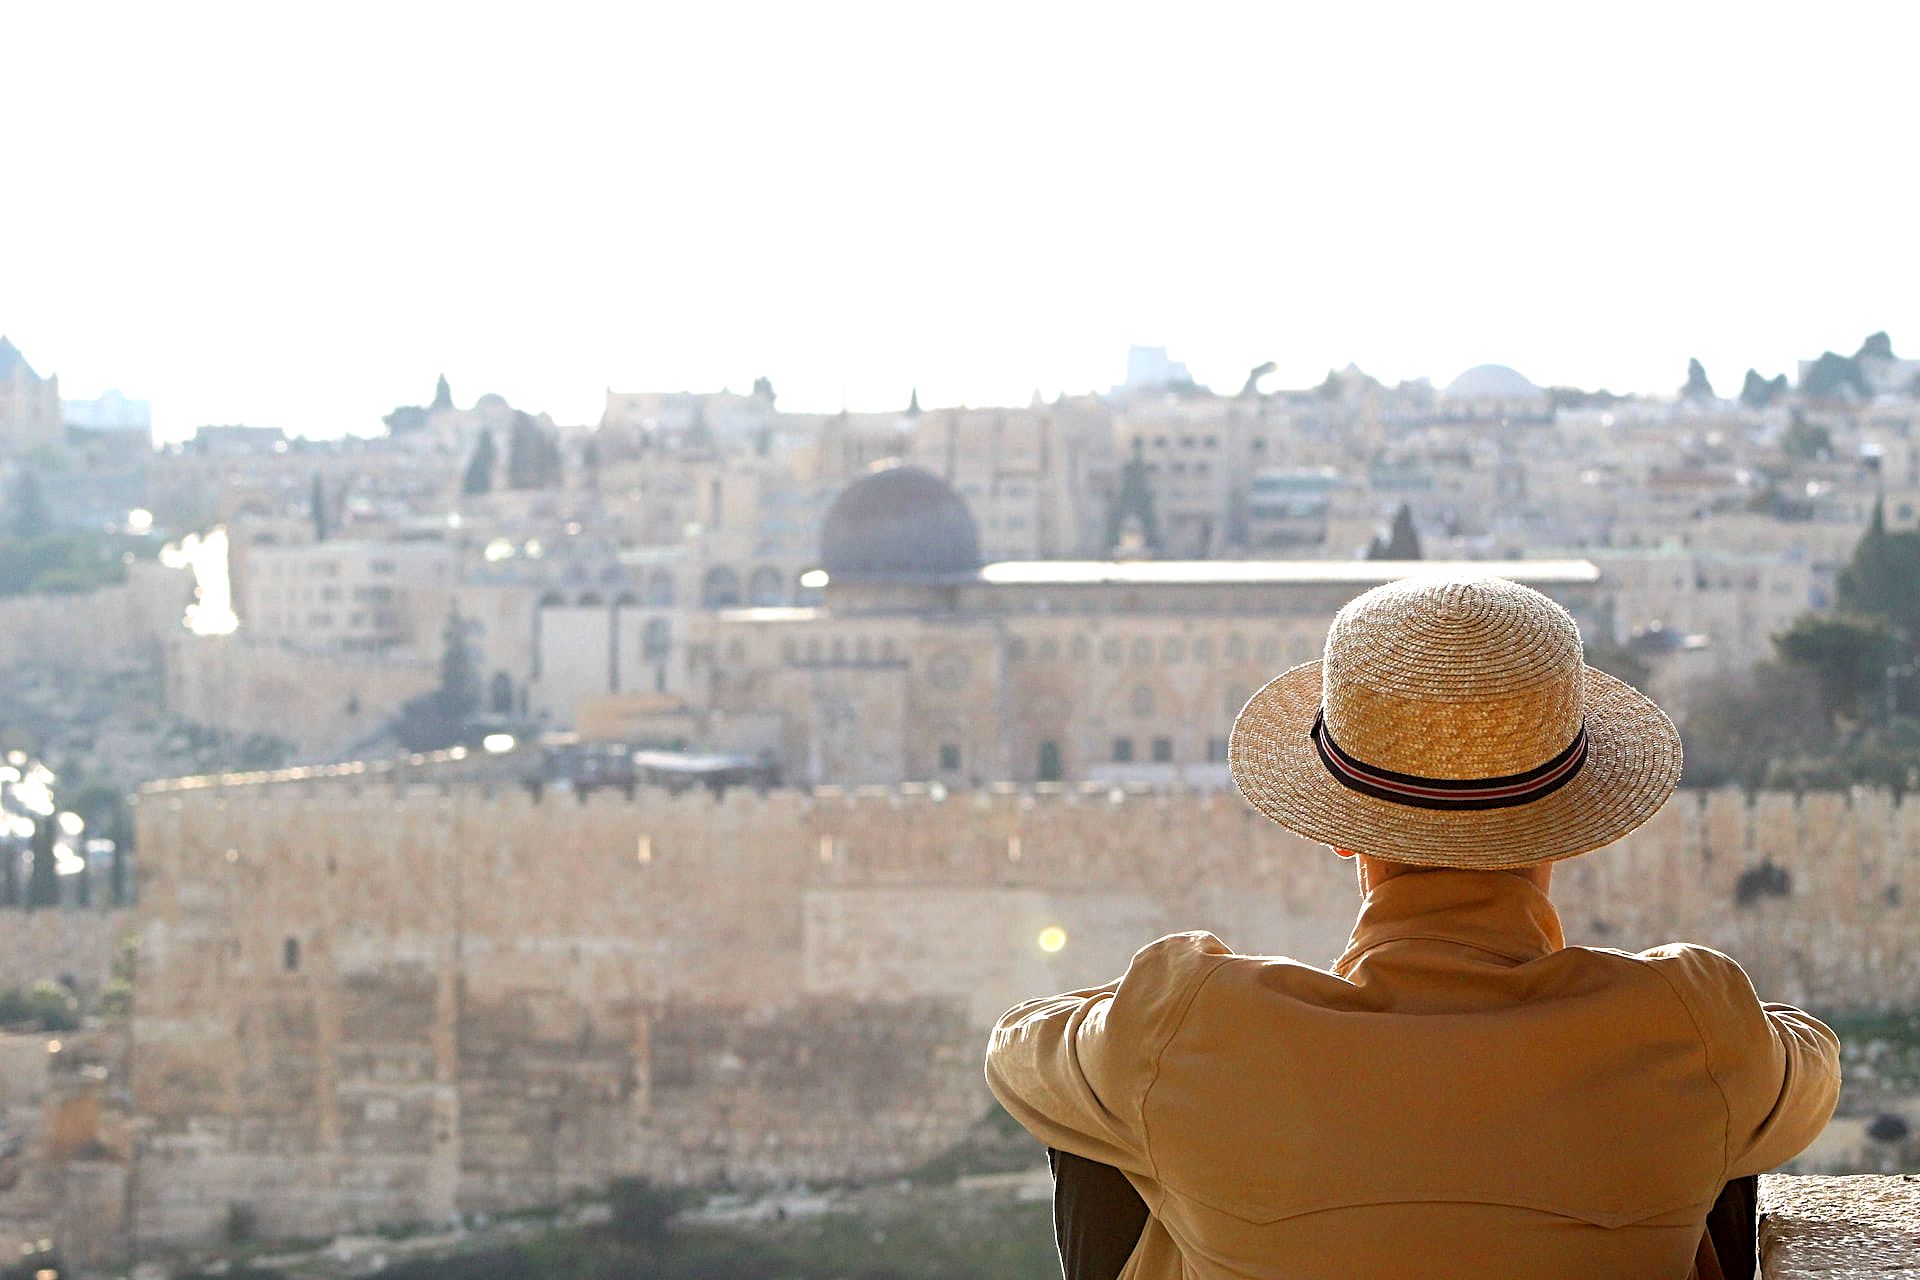 A tourist on the observation deck in Jerusalem looks at the Al-Aqsa Mosque